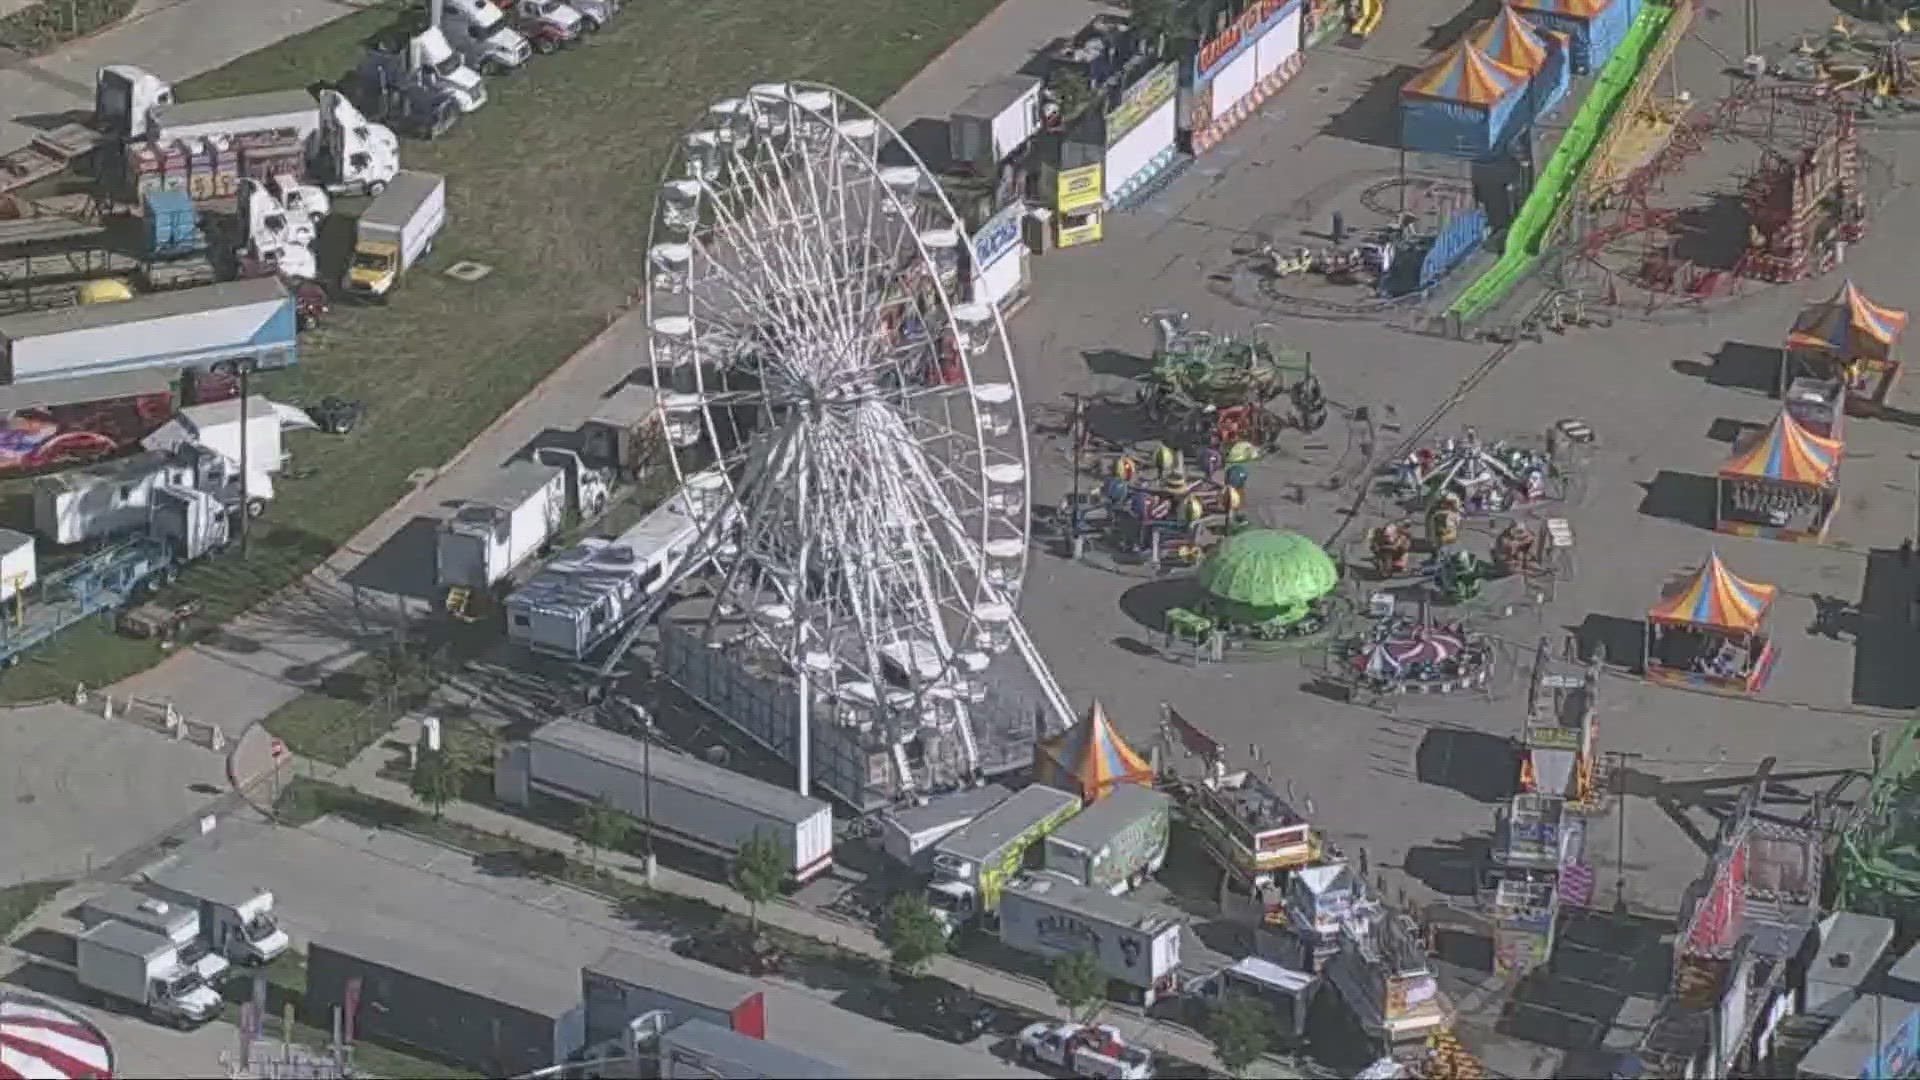 The city cited safety concerns for its decision to revoke the fair's special events permit.